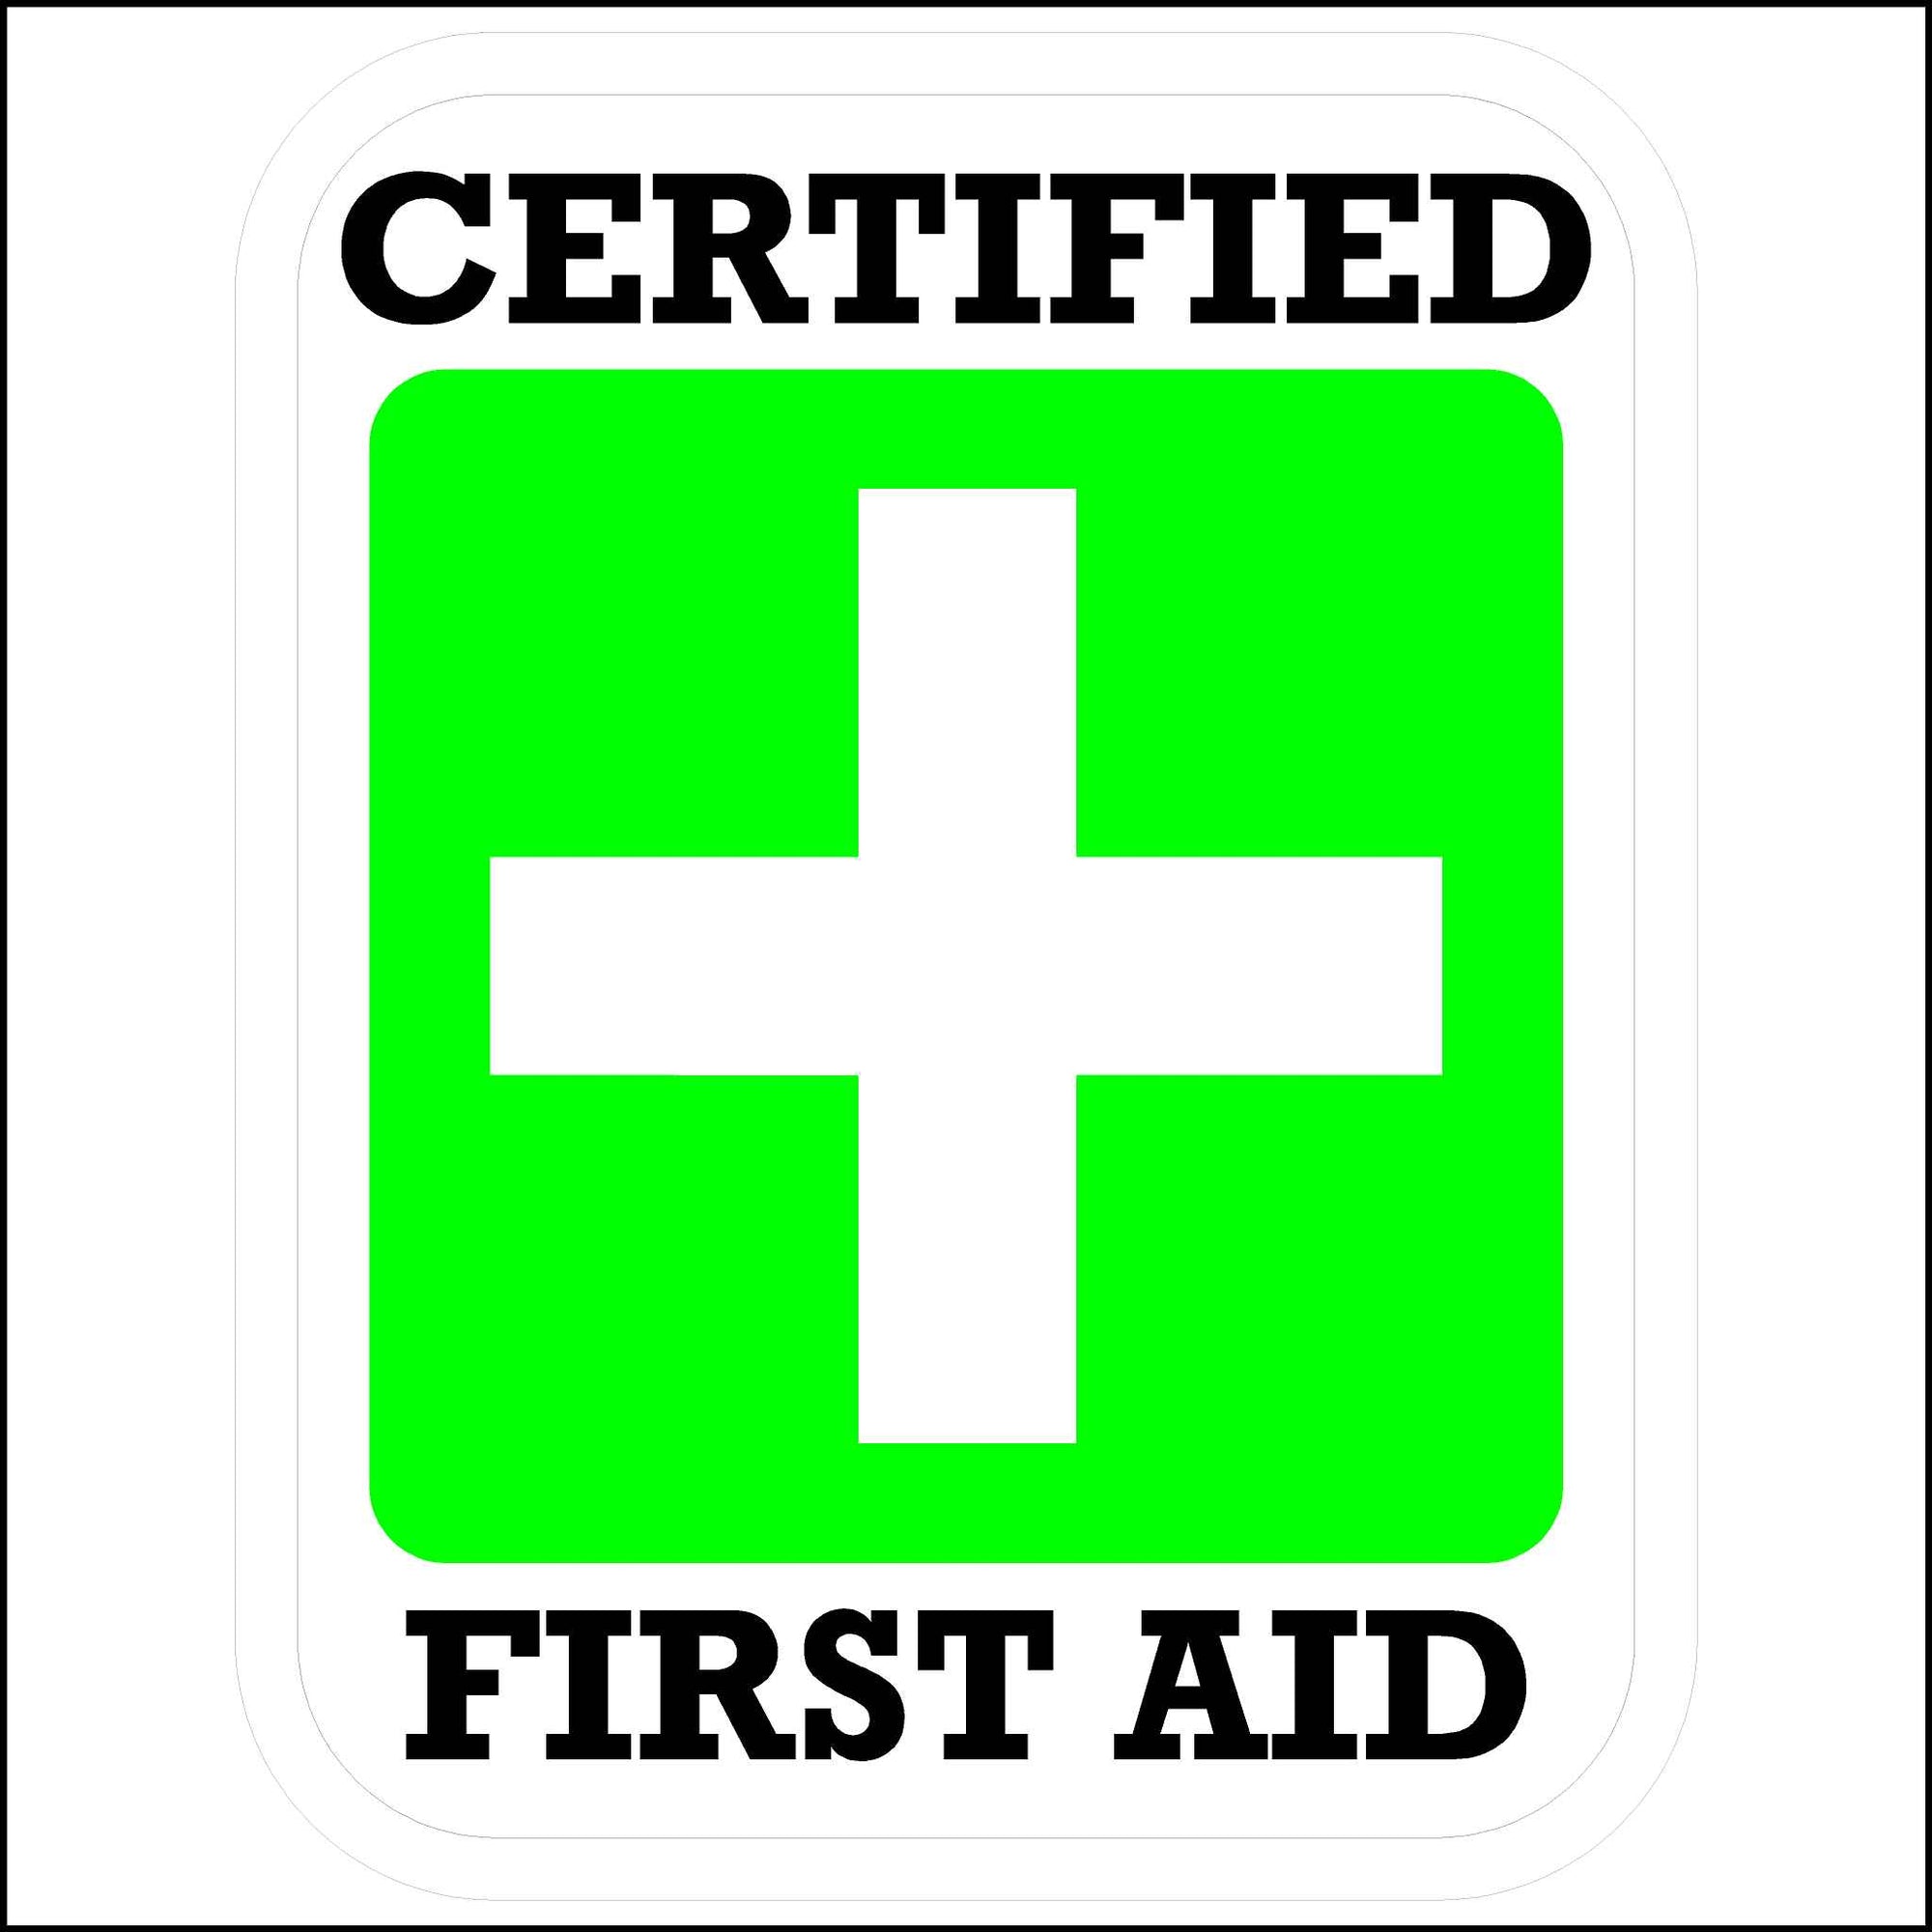 First Aid Certified Sticker Printed in Bright Green, White, and Black.